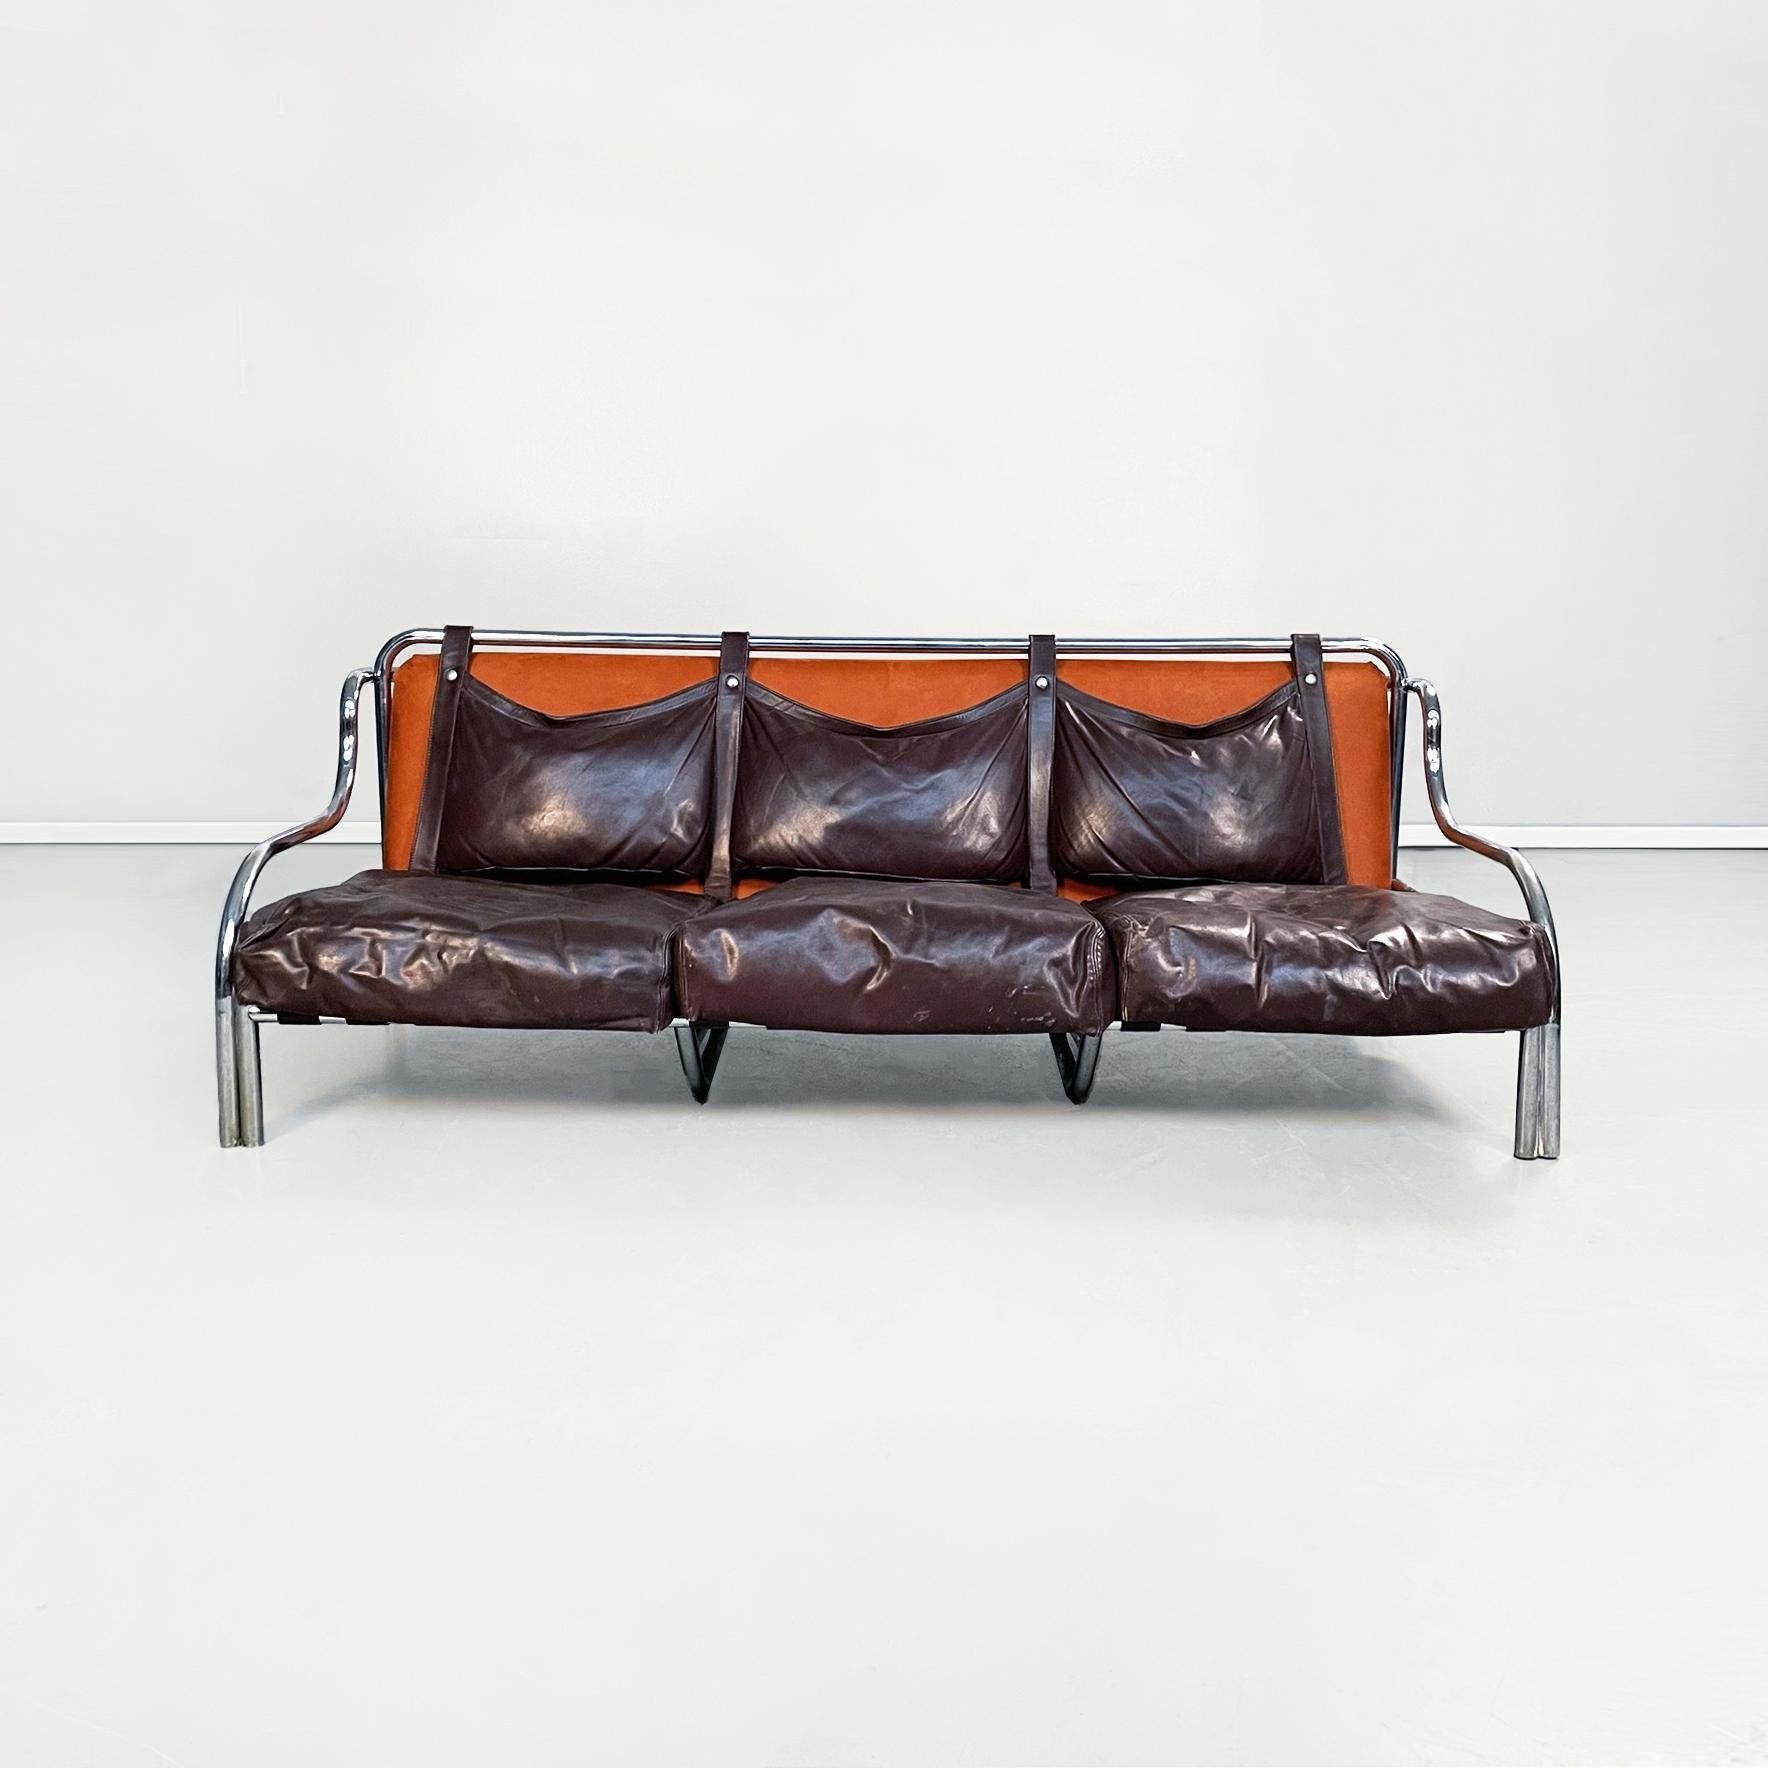 Italian mid-century leather Stringa sofa and armchair by Gae Aulenti for Poltronova, 1965
Stringa 3-seater sofa and armchair. The tubular structure is in chromed metal. Brown leather cushions are tied to the suede backrest, while the seat is made